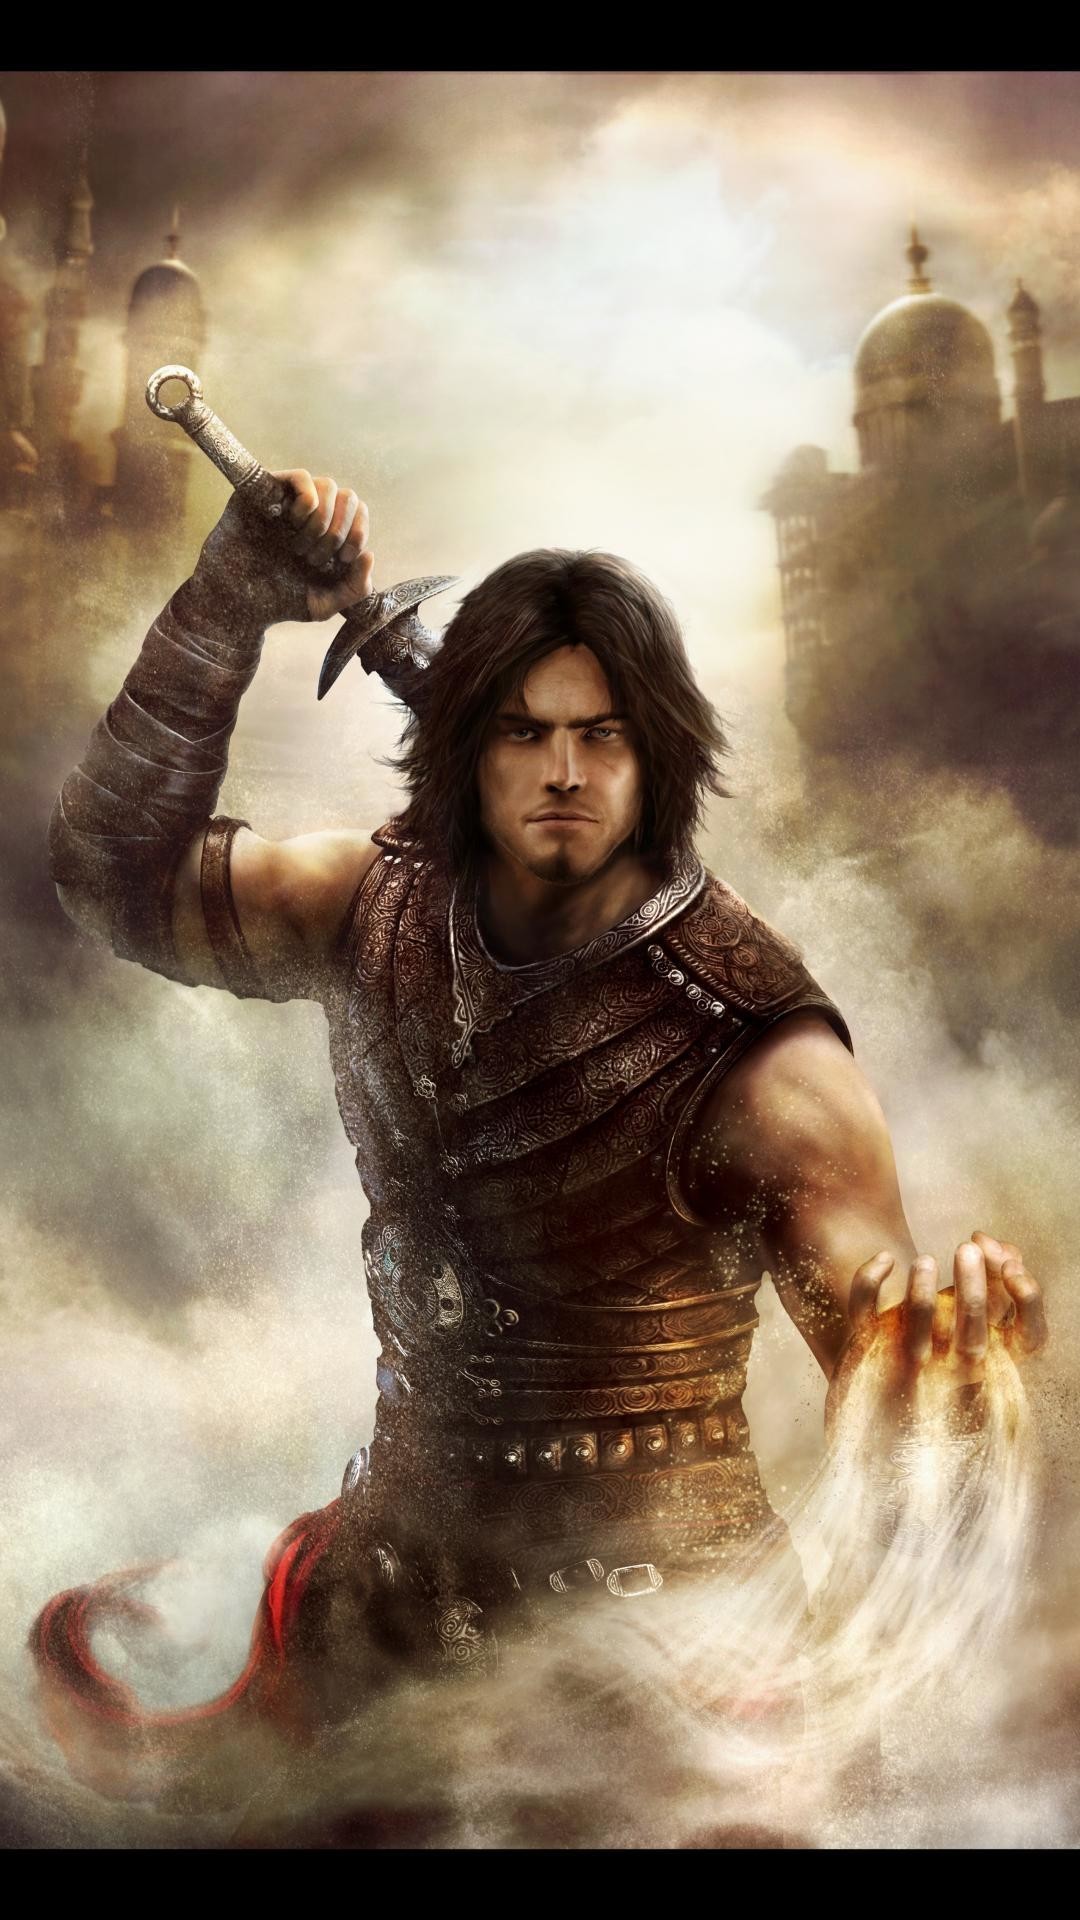 Wallpaper Of Prince Persia For Mobile Hd Pics Computer - Prince Of Persia  The Forgotten - 1080x1920 Wallpaper 